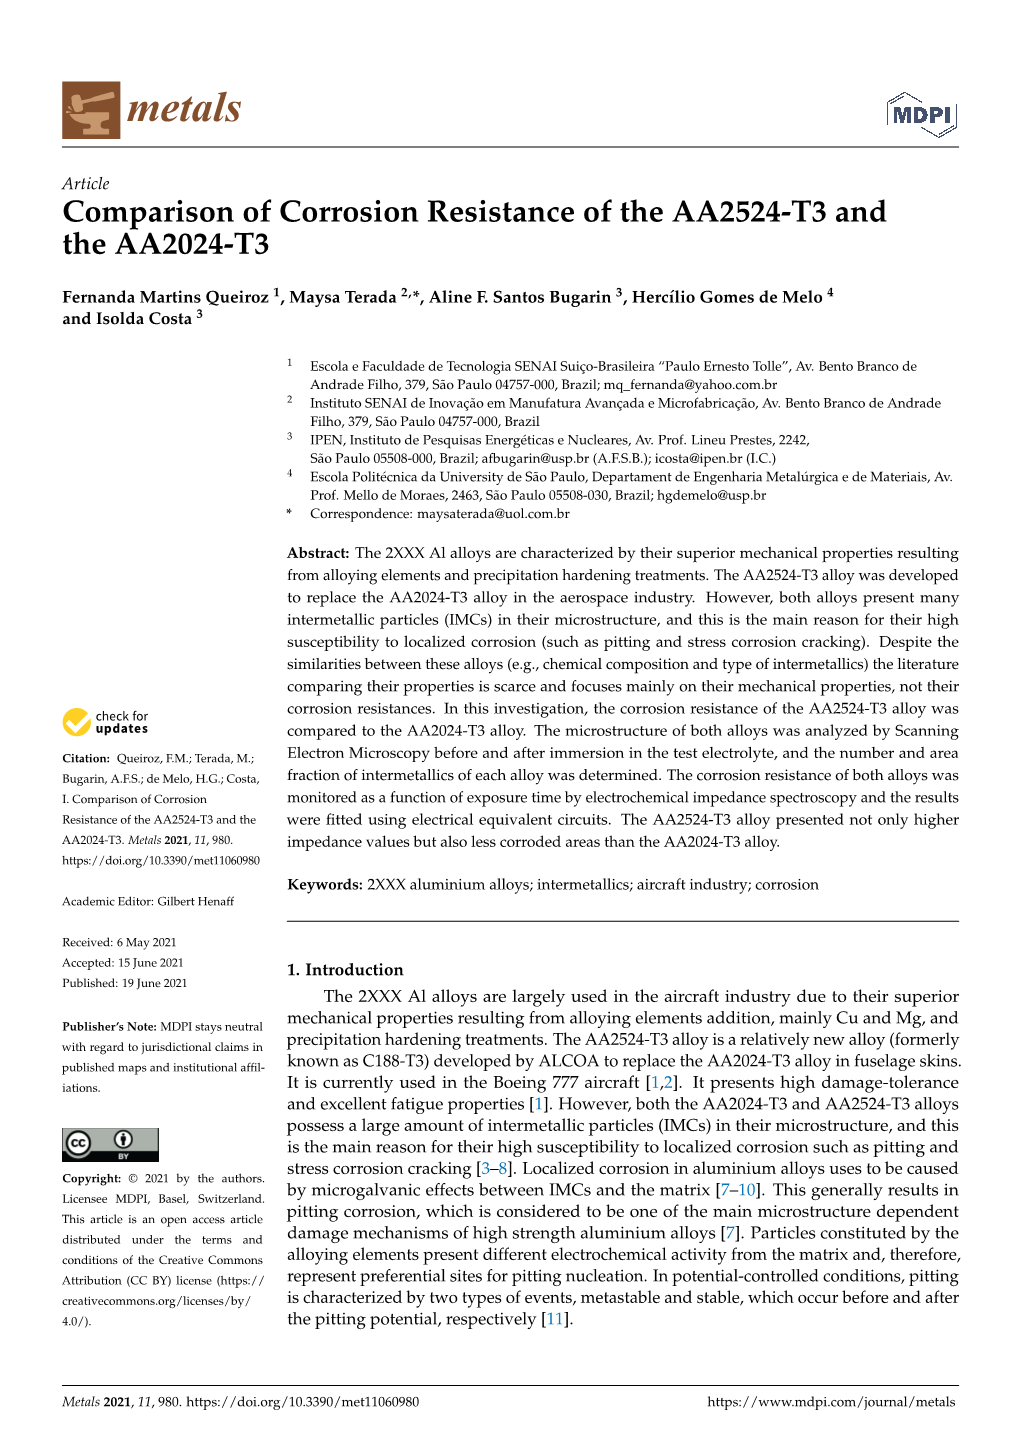 Comparison of Corrosion Resistance of the AA2524-T3 Andthe AA2024-T3